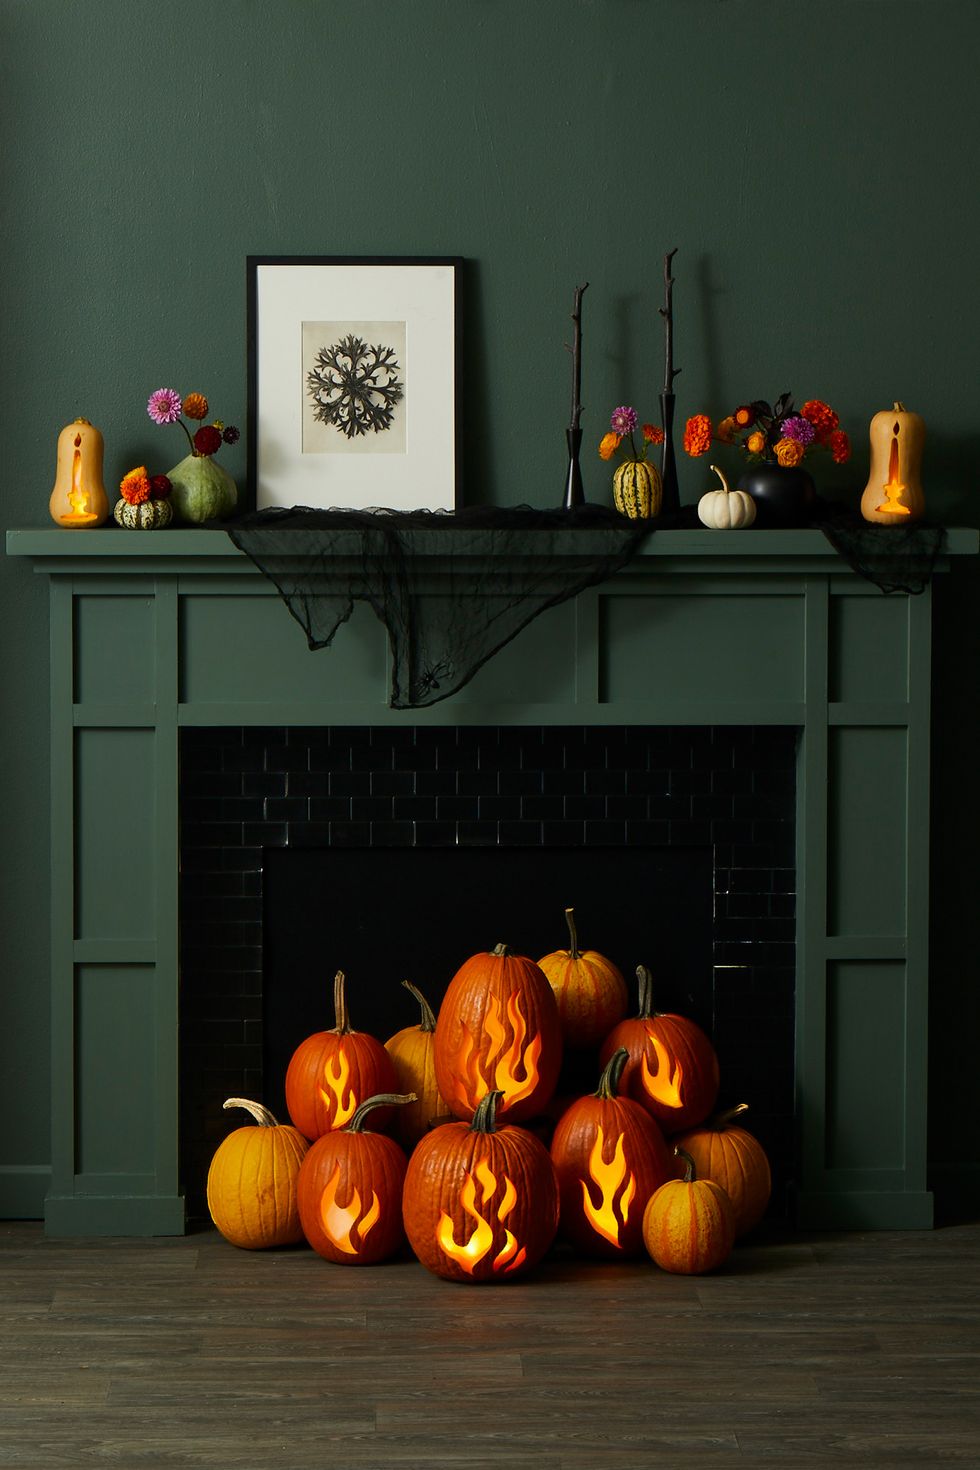 pumpkin carving ideas, multiple pumpkins with carved flamed designs in front of the fireplace